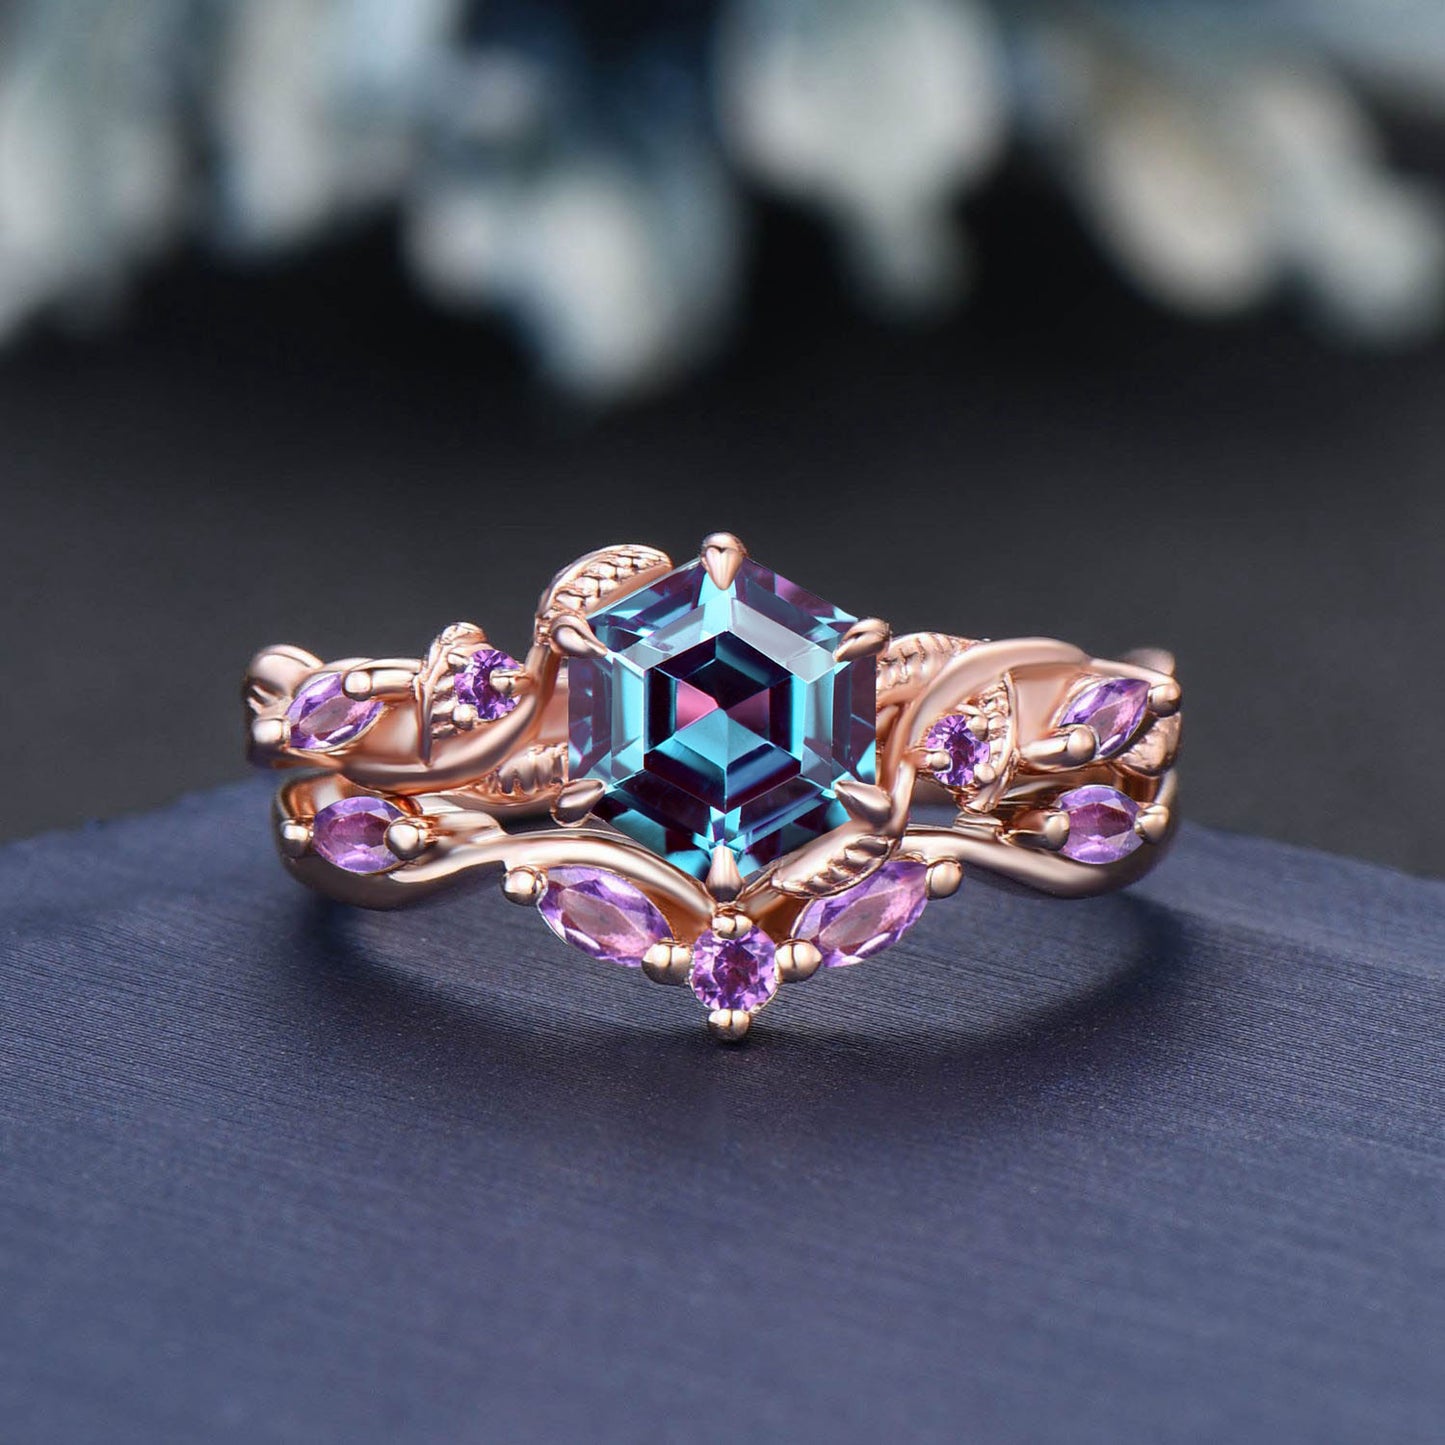 1ct Hexagon Color-Change Alexandrite Engagement Ring Set 14K Rose Gold Moissanite Wedding Ring June Birthstone Jewelry Unique Birthday Gifts